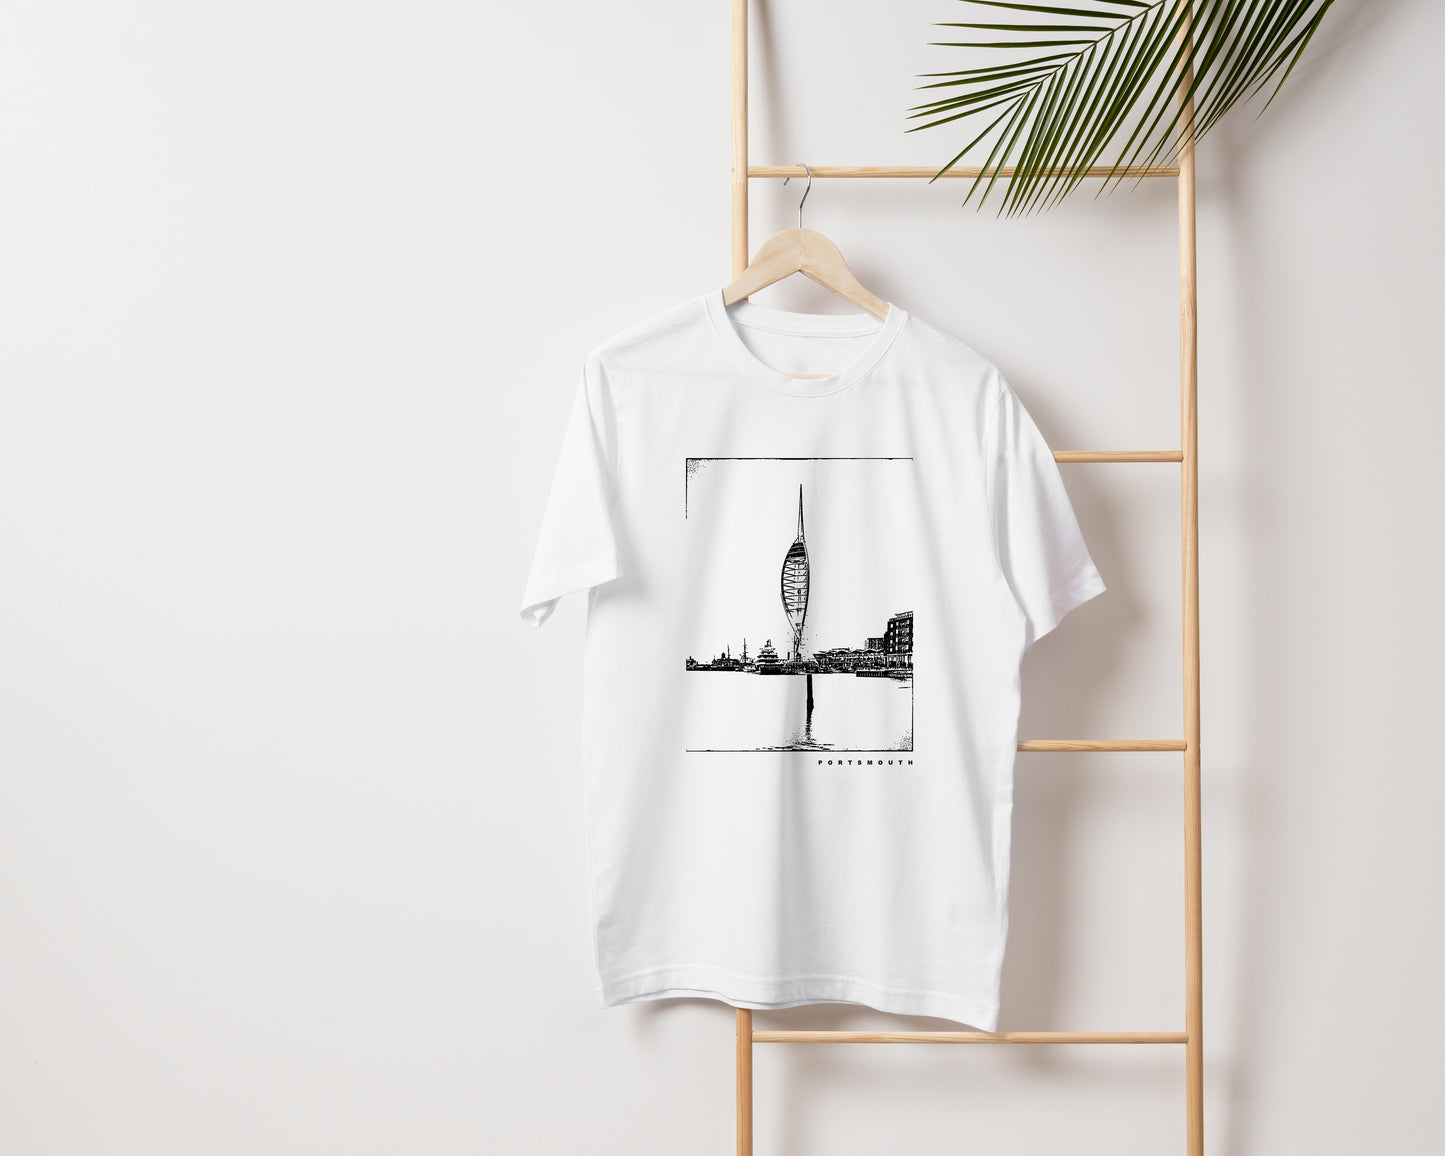 Portsmouth Sketch Tee - Available on White/Grey/Black T-Shirts